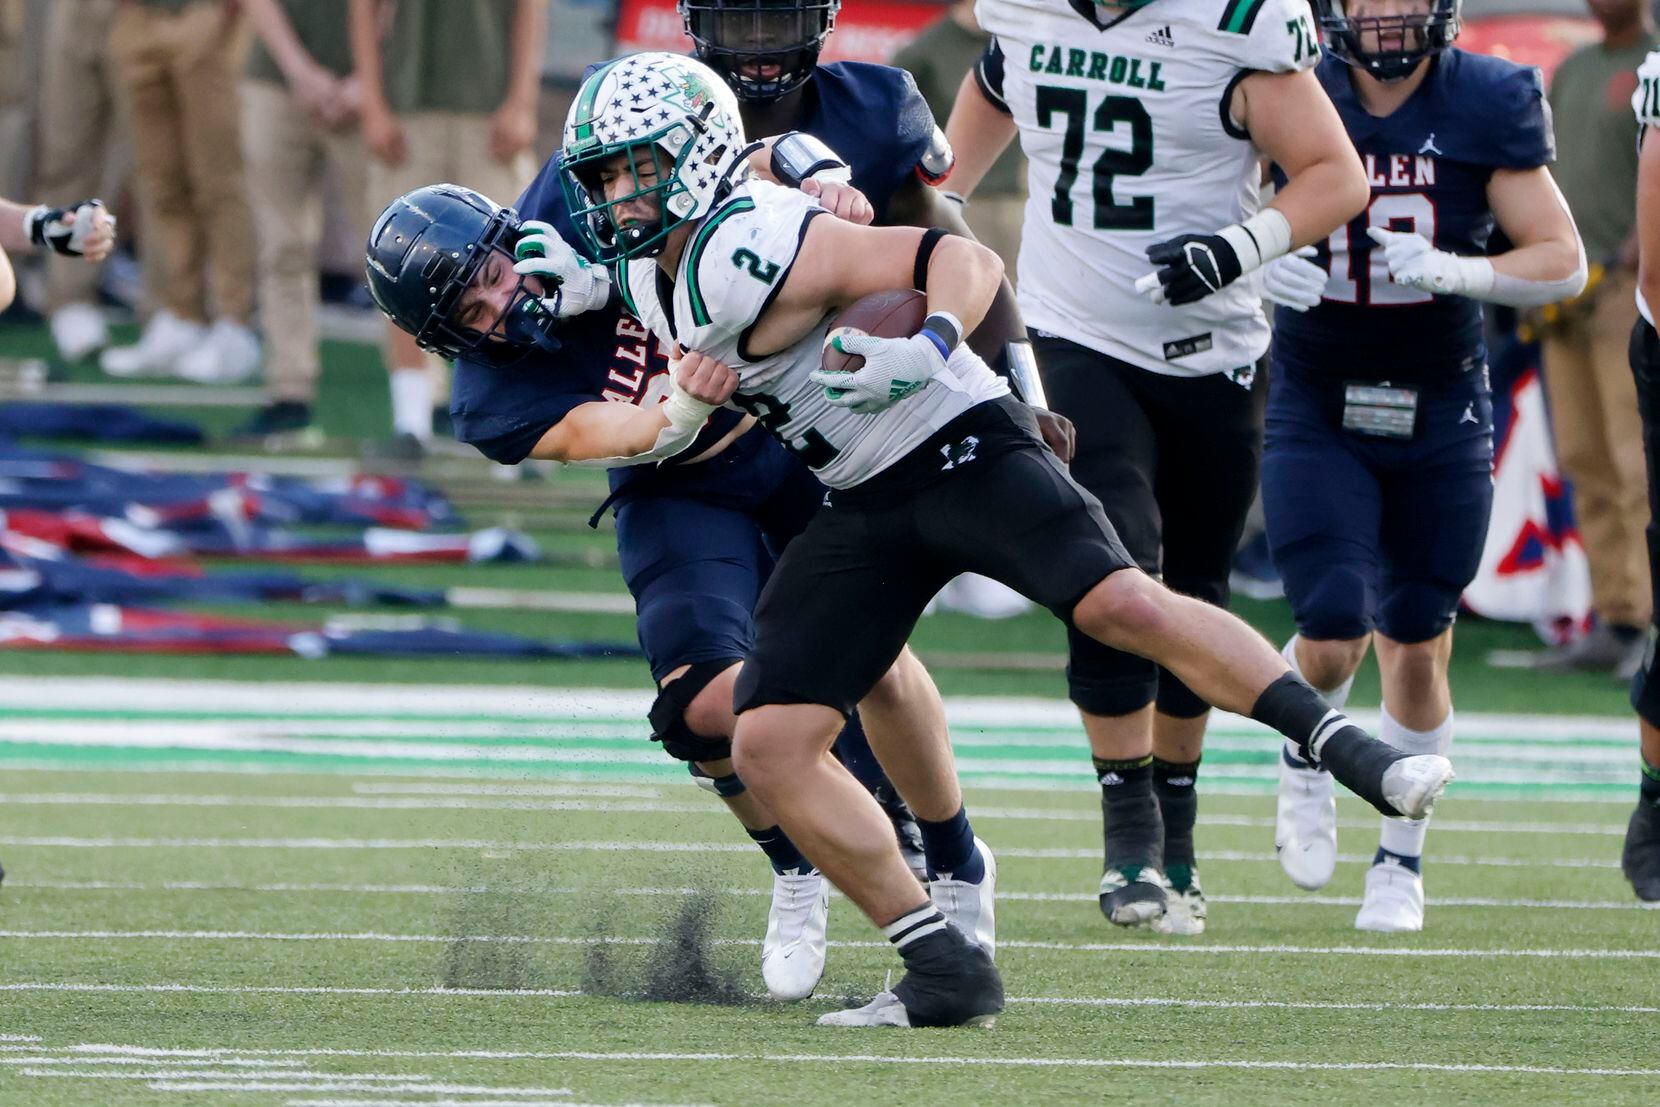 Southlake Carroll’s Owen Allen (2) tries to get away from Allen’s Blake Harvey (35) during the second half of a Class 6A Division I Region I final high school football game in Denton, Texas on Saturday, Dec. 4, 2021. Southlake defeated Allen 47-21. (Michael Ainsworth/Special Contributor)